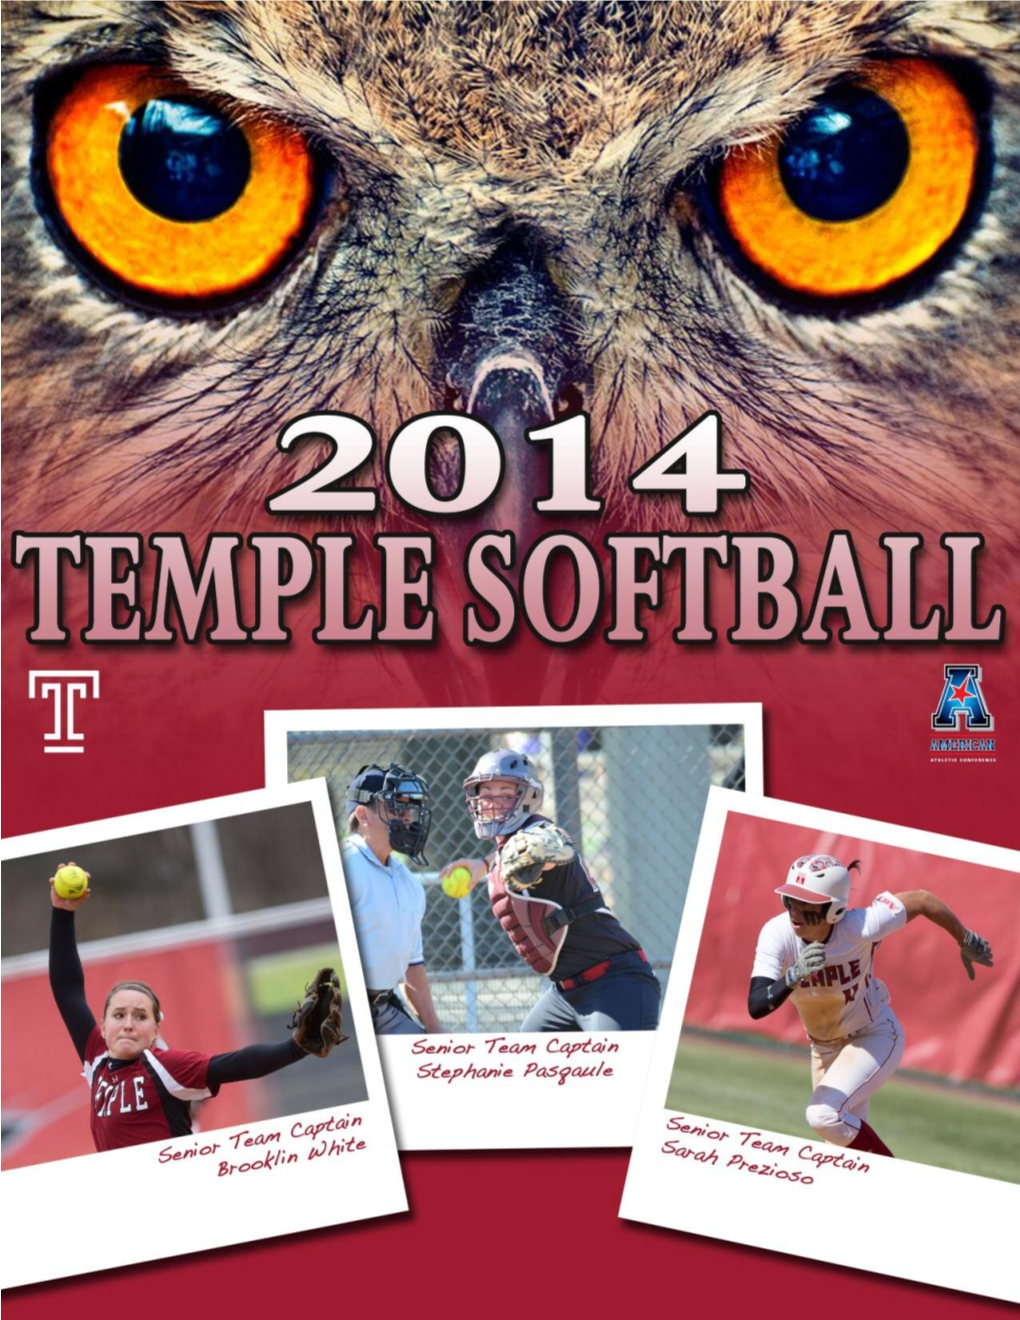 Temple Softball Stadium to Reflect the Additions and March 26, 2004 Before a 2-0 Win in the Second-Half of a Doubleheader with Improvements